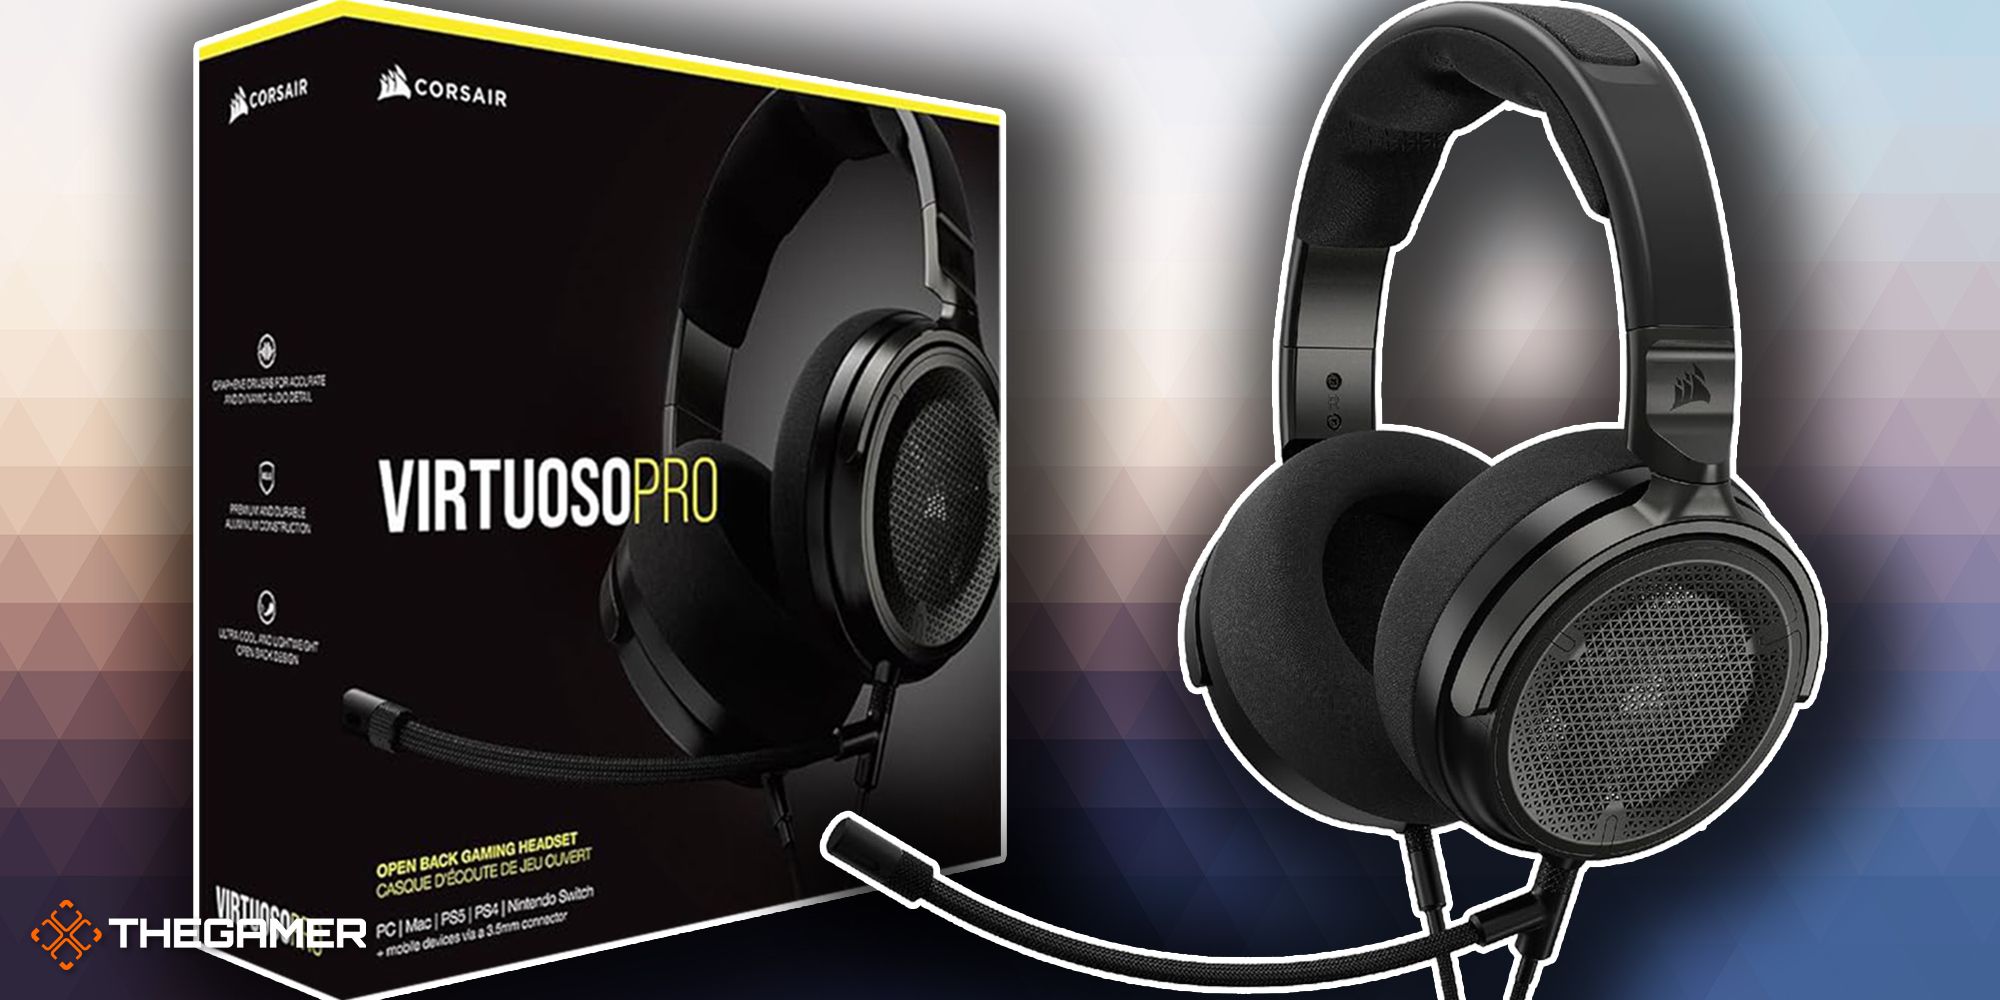 Corsair\'s Virtuoso Phenomenal You\'re Life Wired Pro The Headset Living Still A If Is